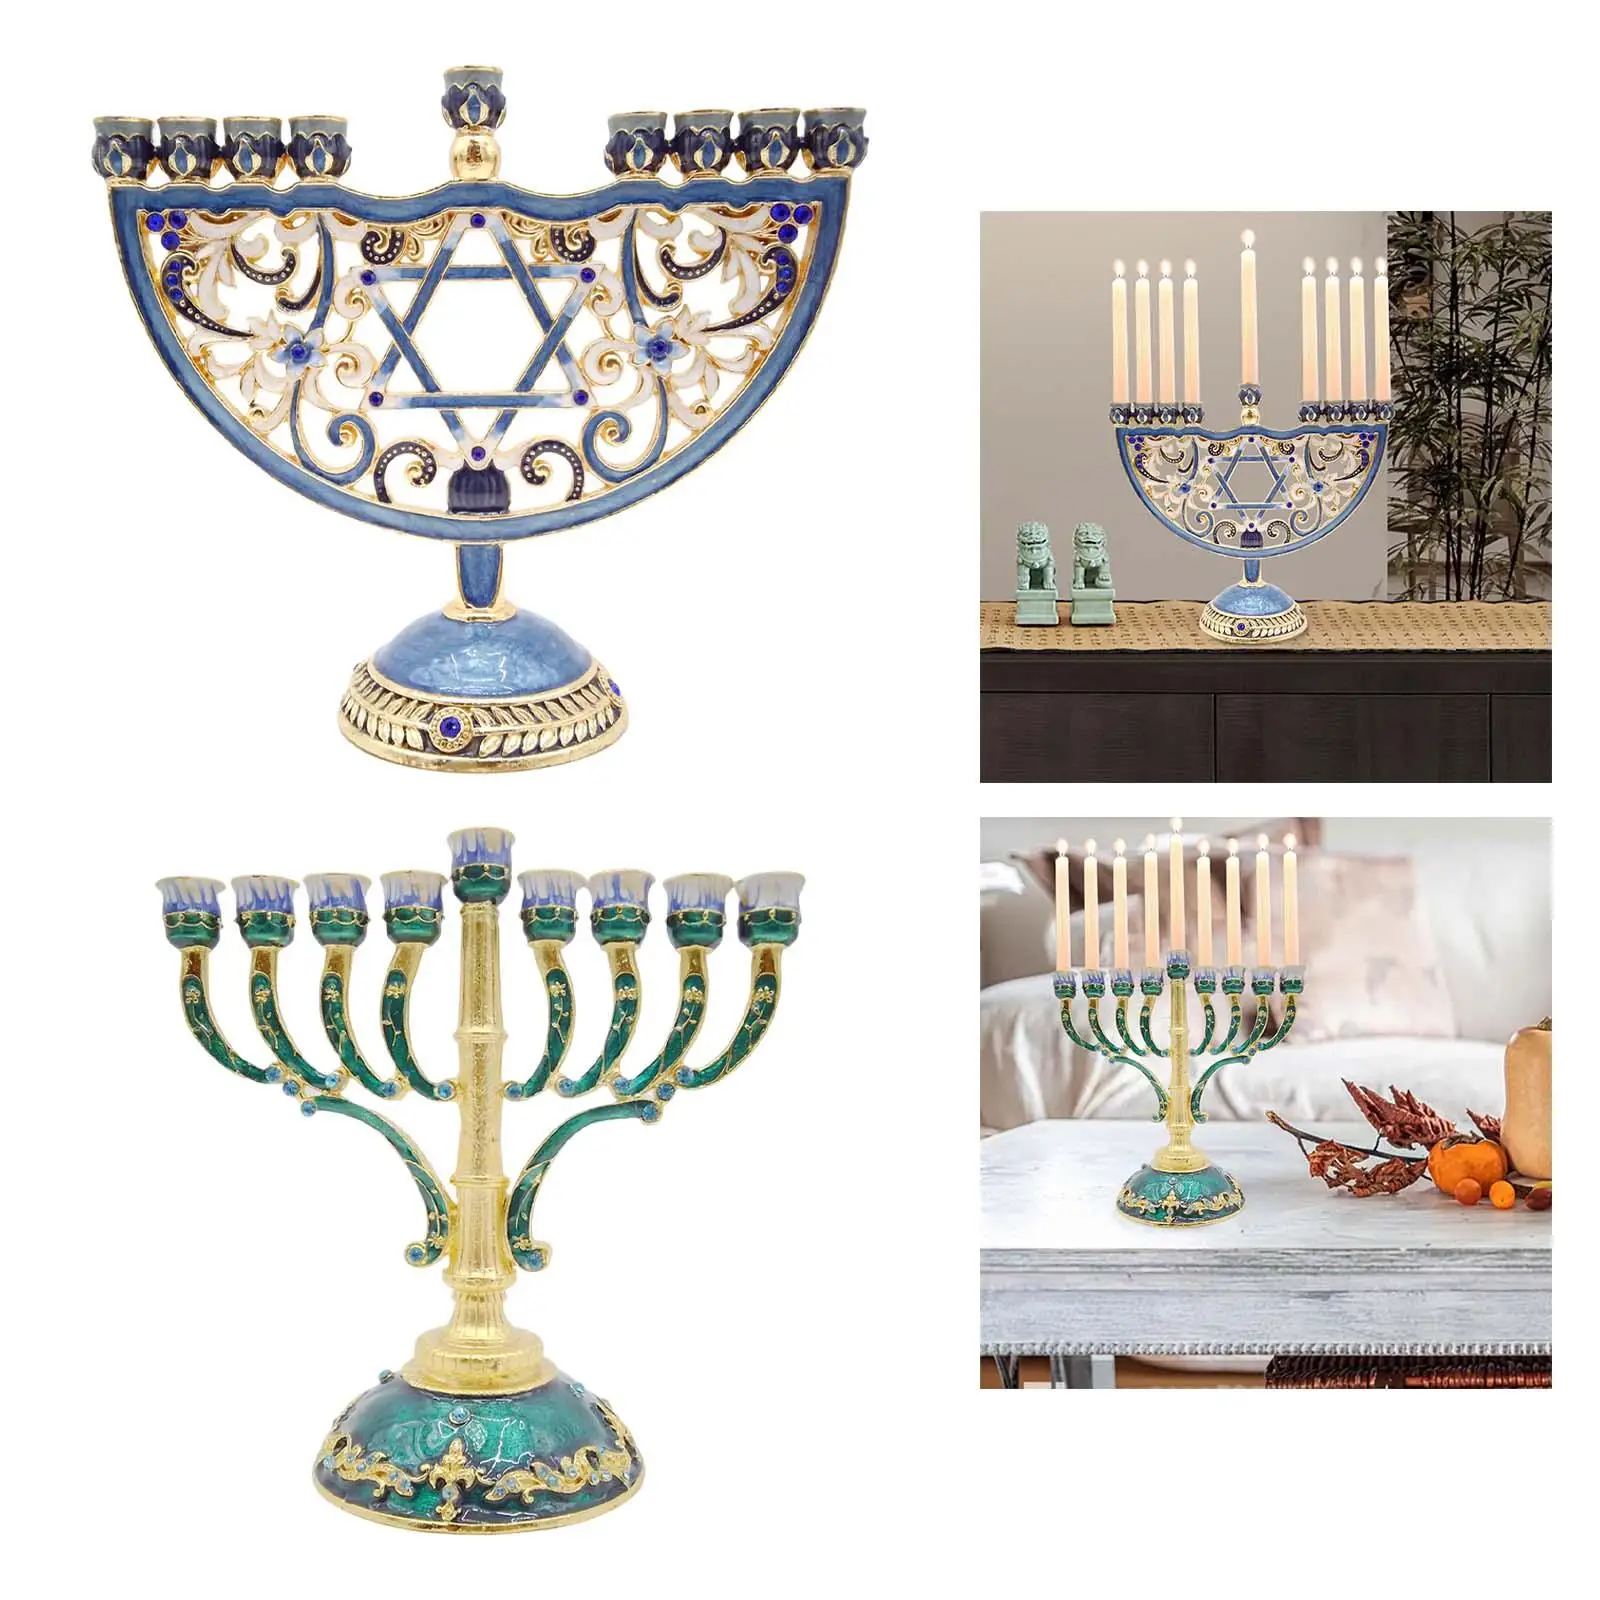 Enameled Metal Menorah with Jeweled Accents Bejeweled Jewish Candlesticks